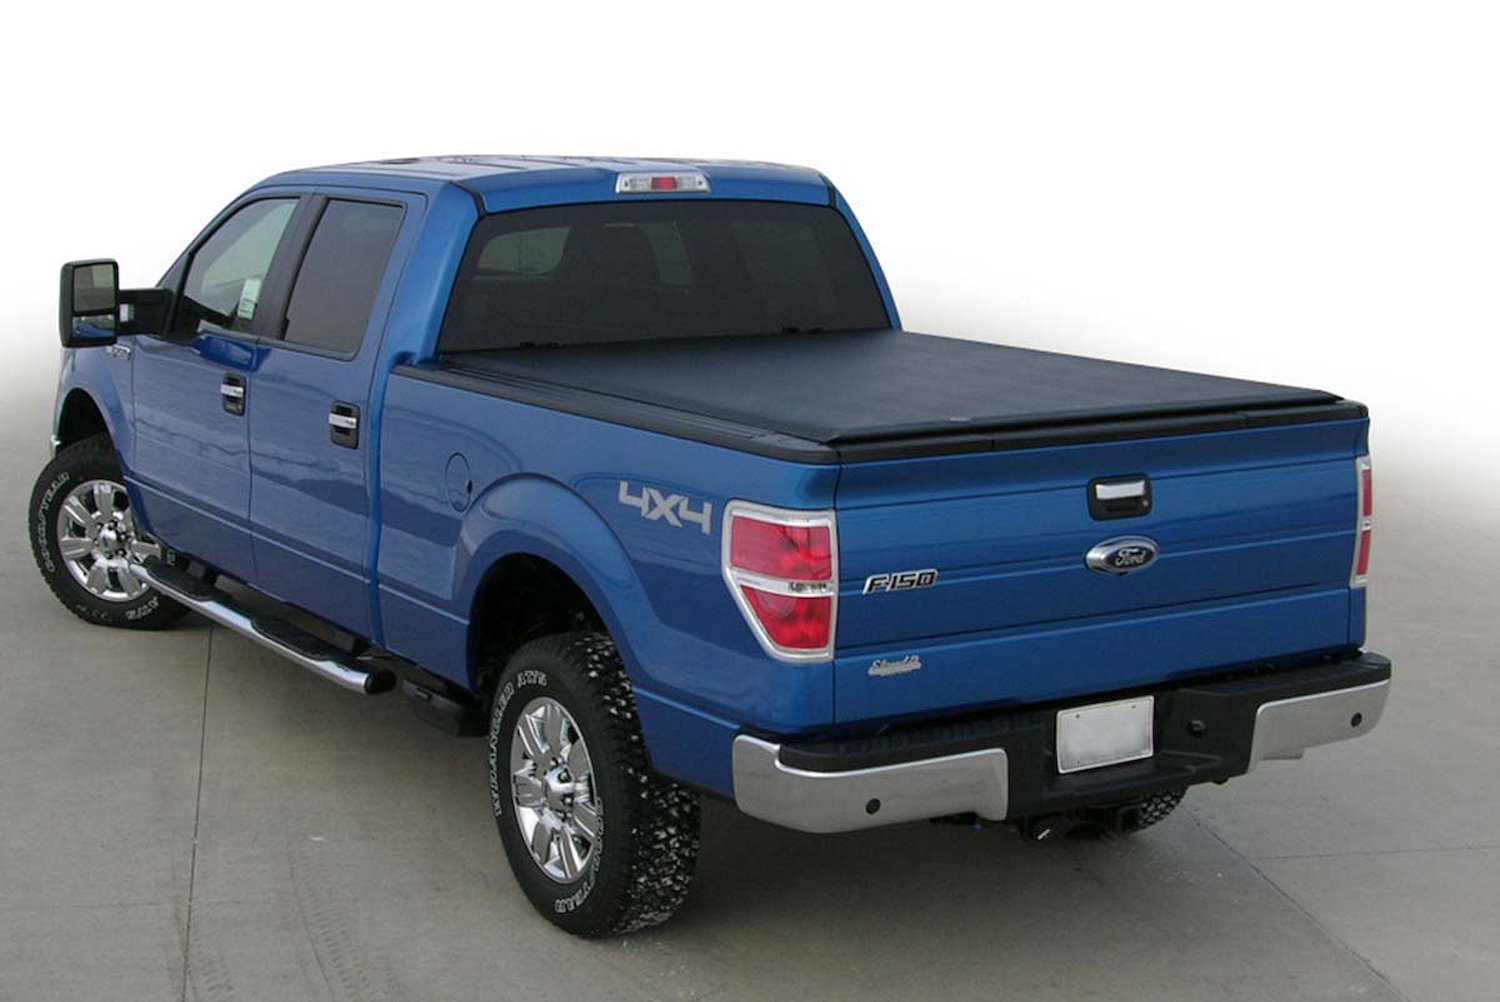 LORADO Roll-Up Tonneau Cover, Fits Select Toyota Tundra, with 5 ft. 6 in. Bed